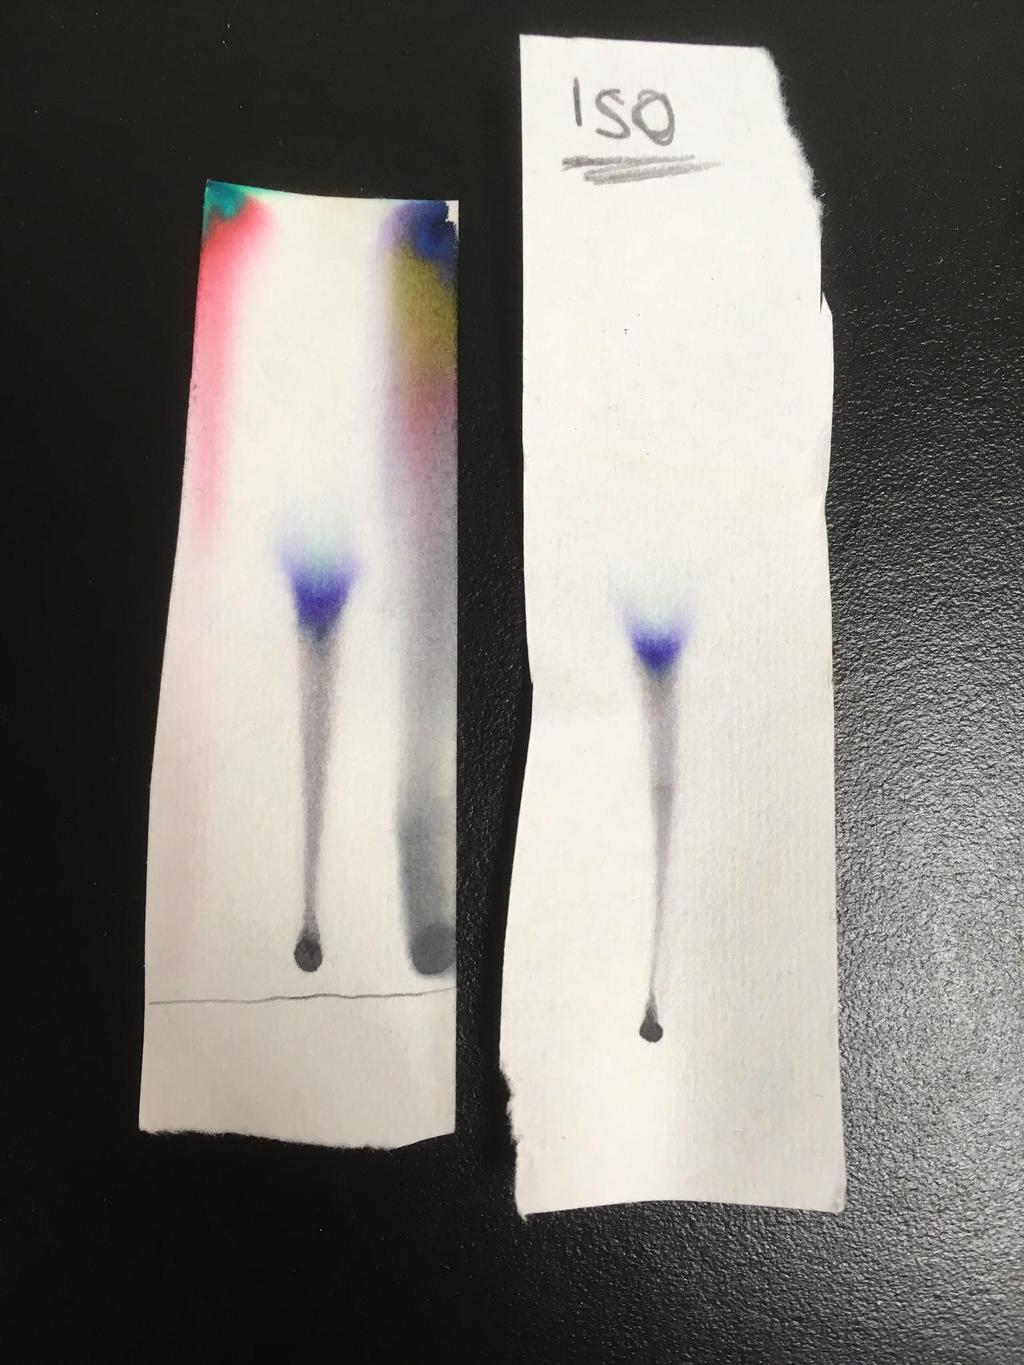 Chromatography Chromatography was used to match the retention factor and coloring of